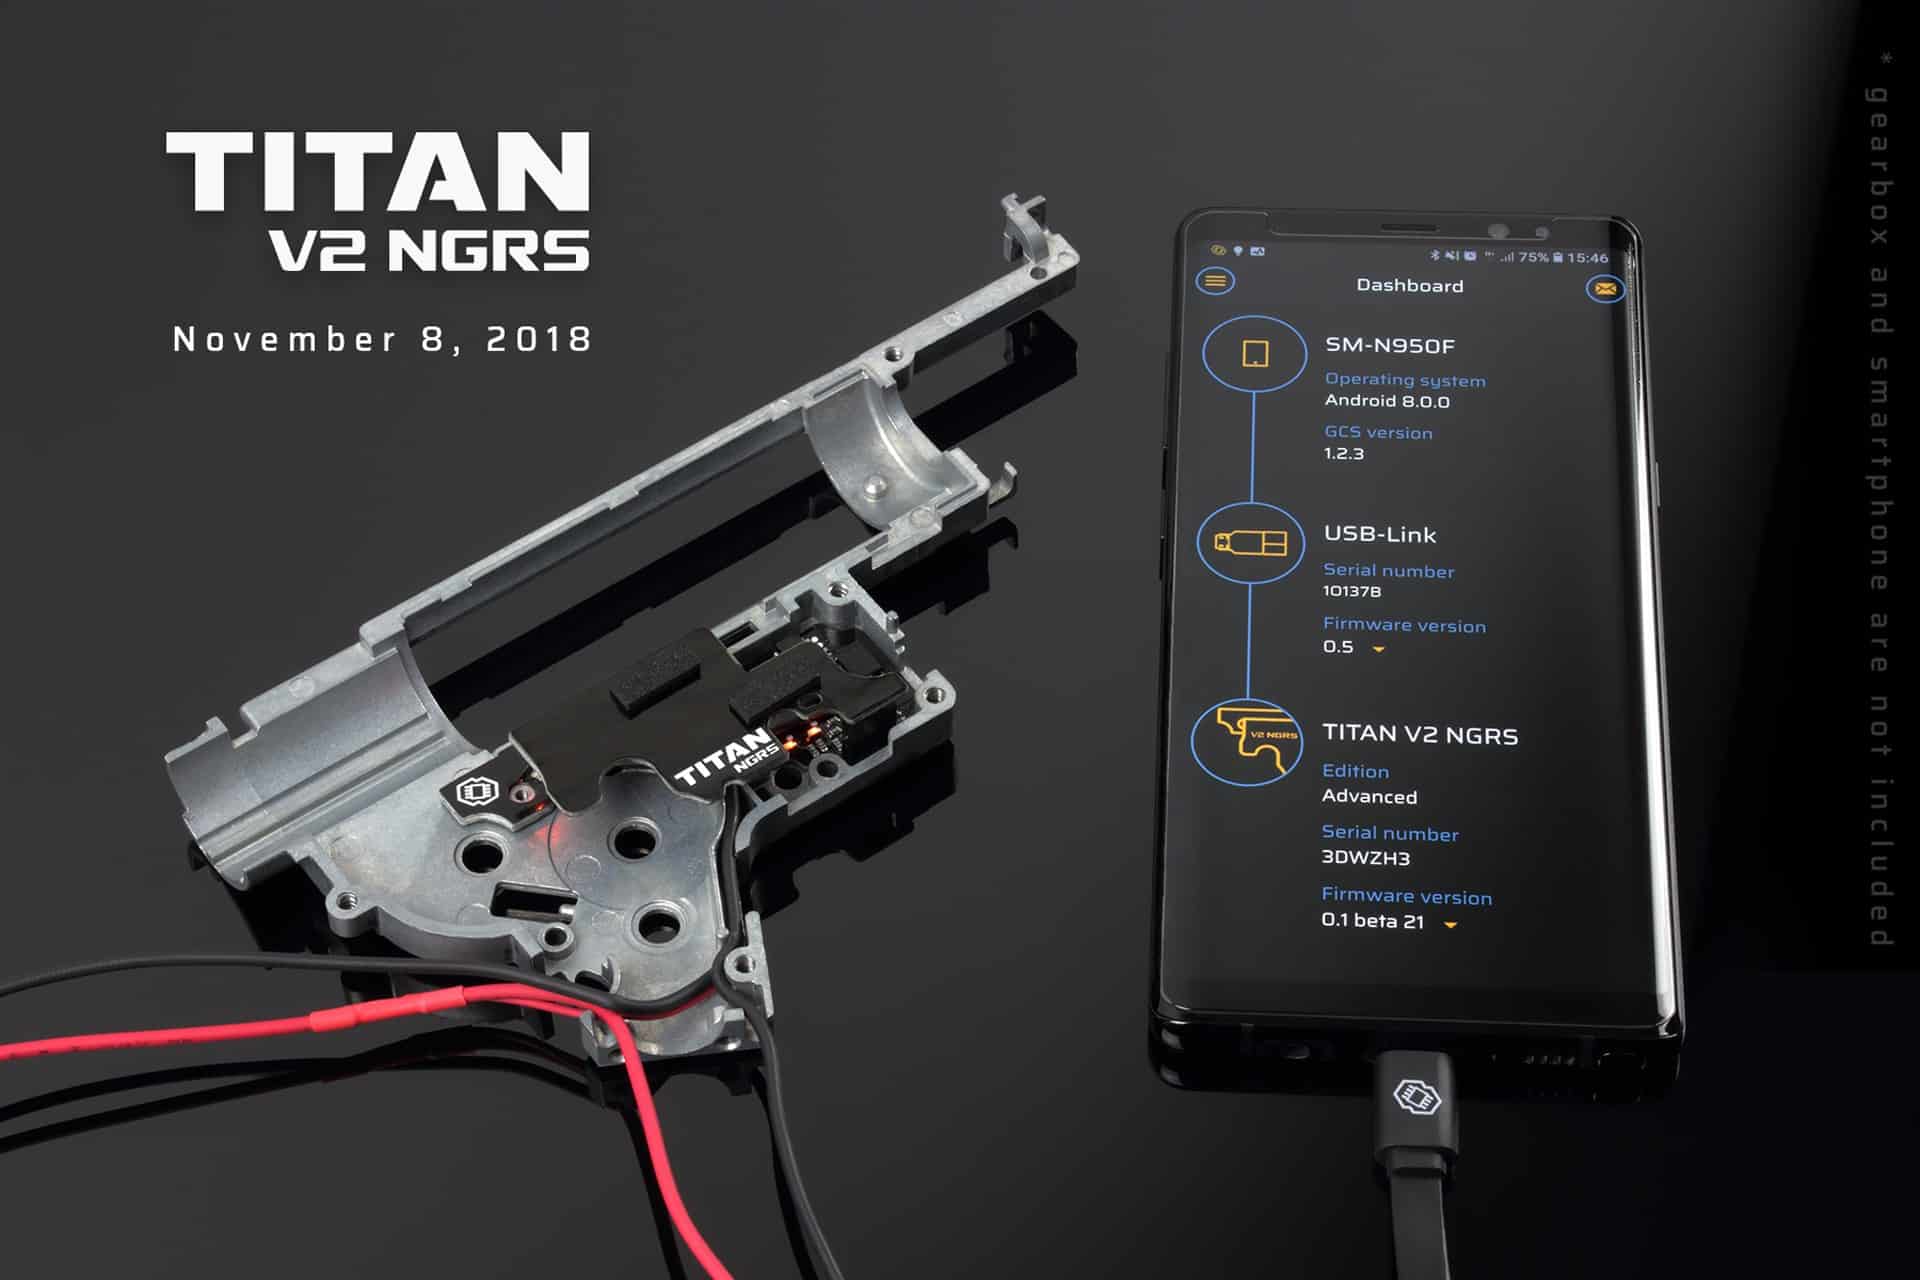 Gate Titan Mosfet V2 NGRS next gen recoil Rear wired - Basic